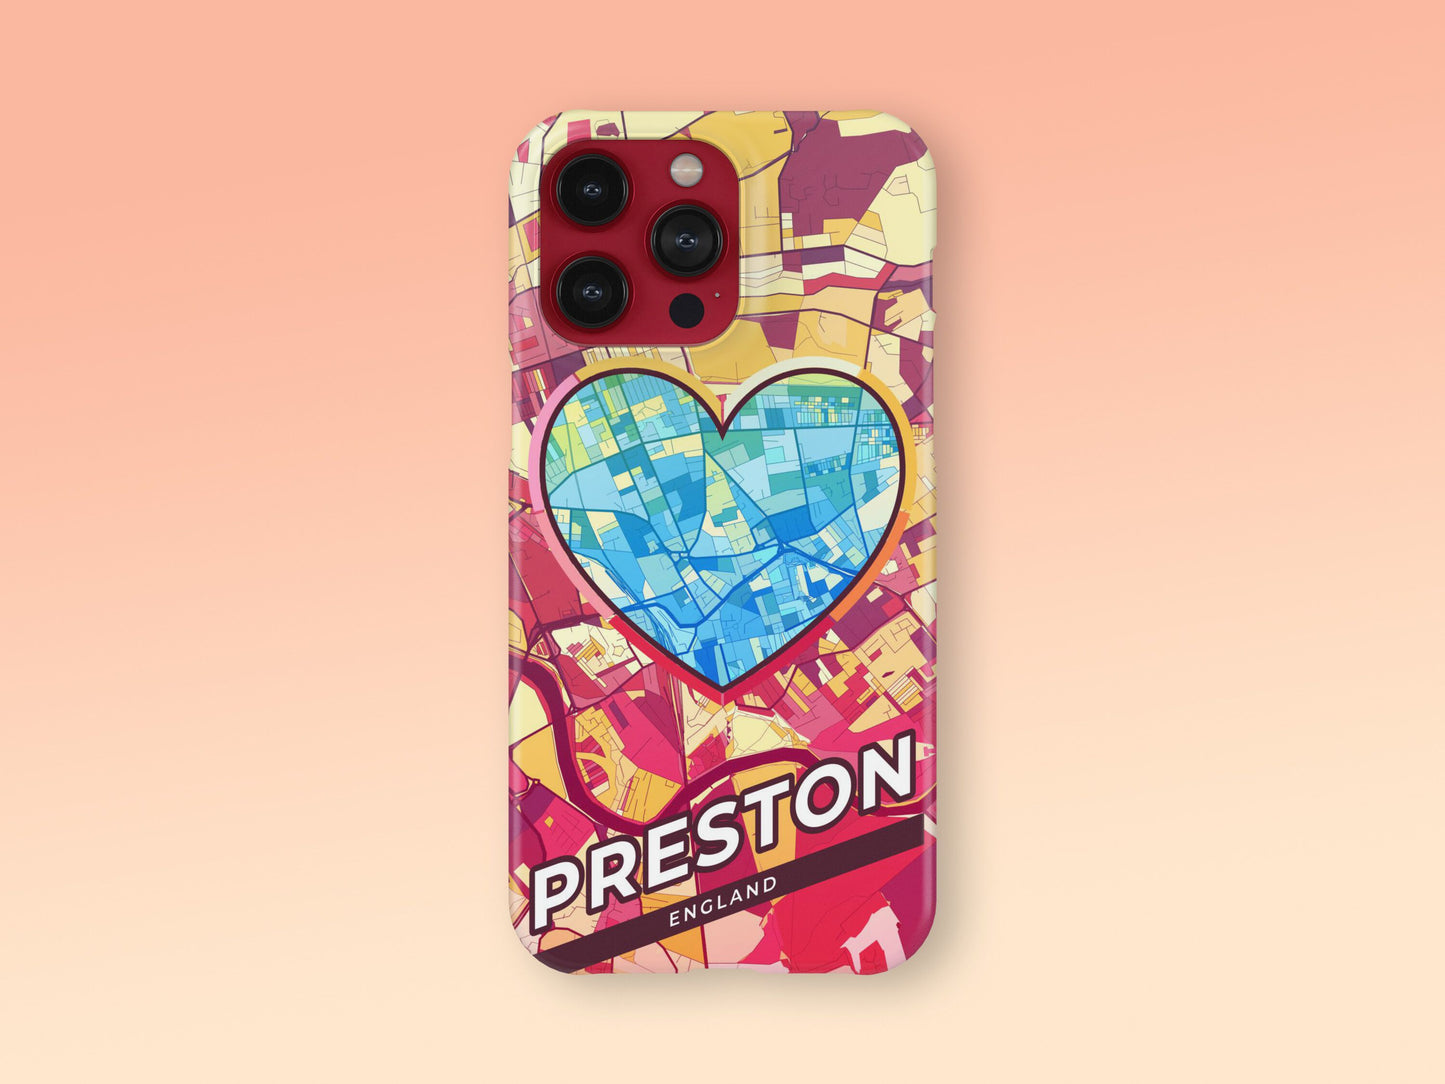 Preston England slim phone case with colorful icon. Birthday, wedding or housewarming gift. Couple match cases. 2